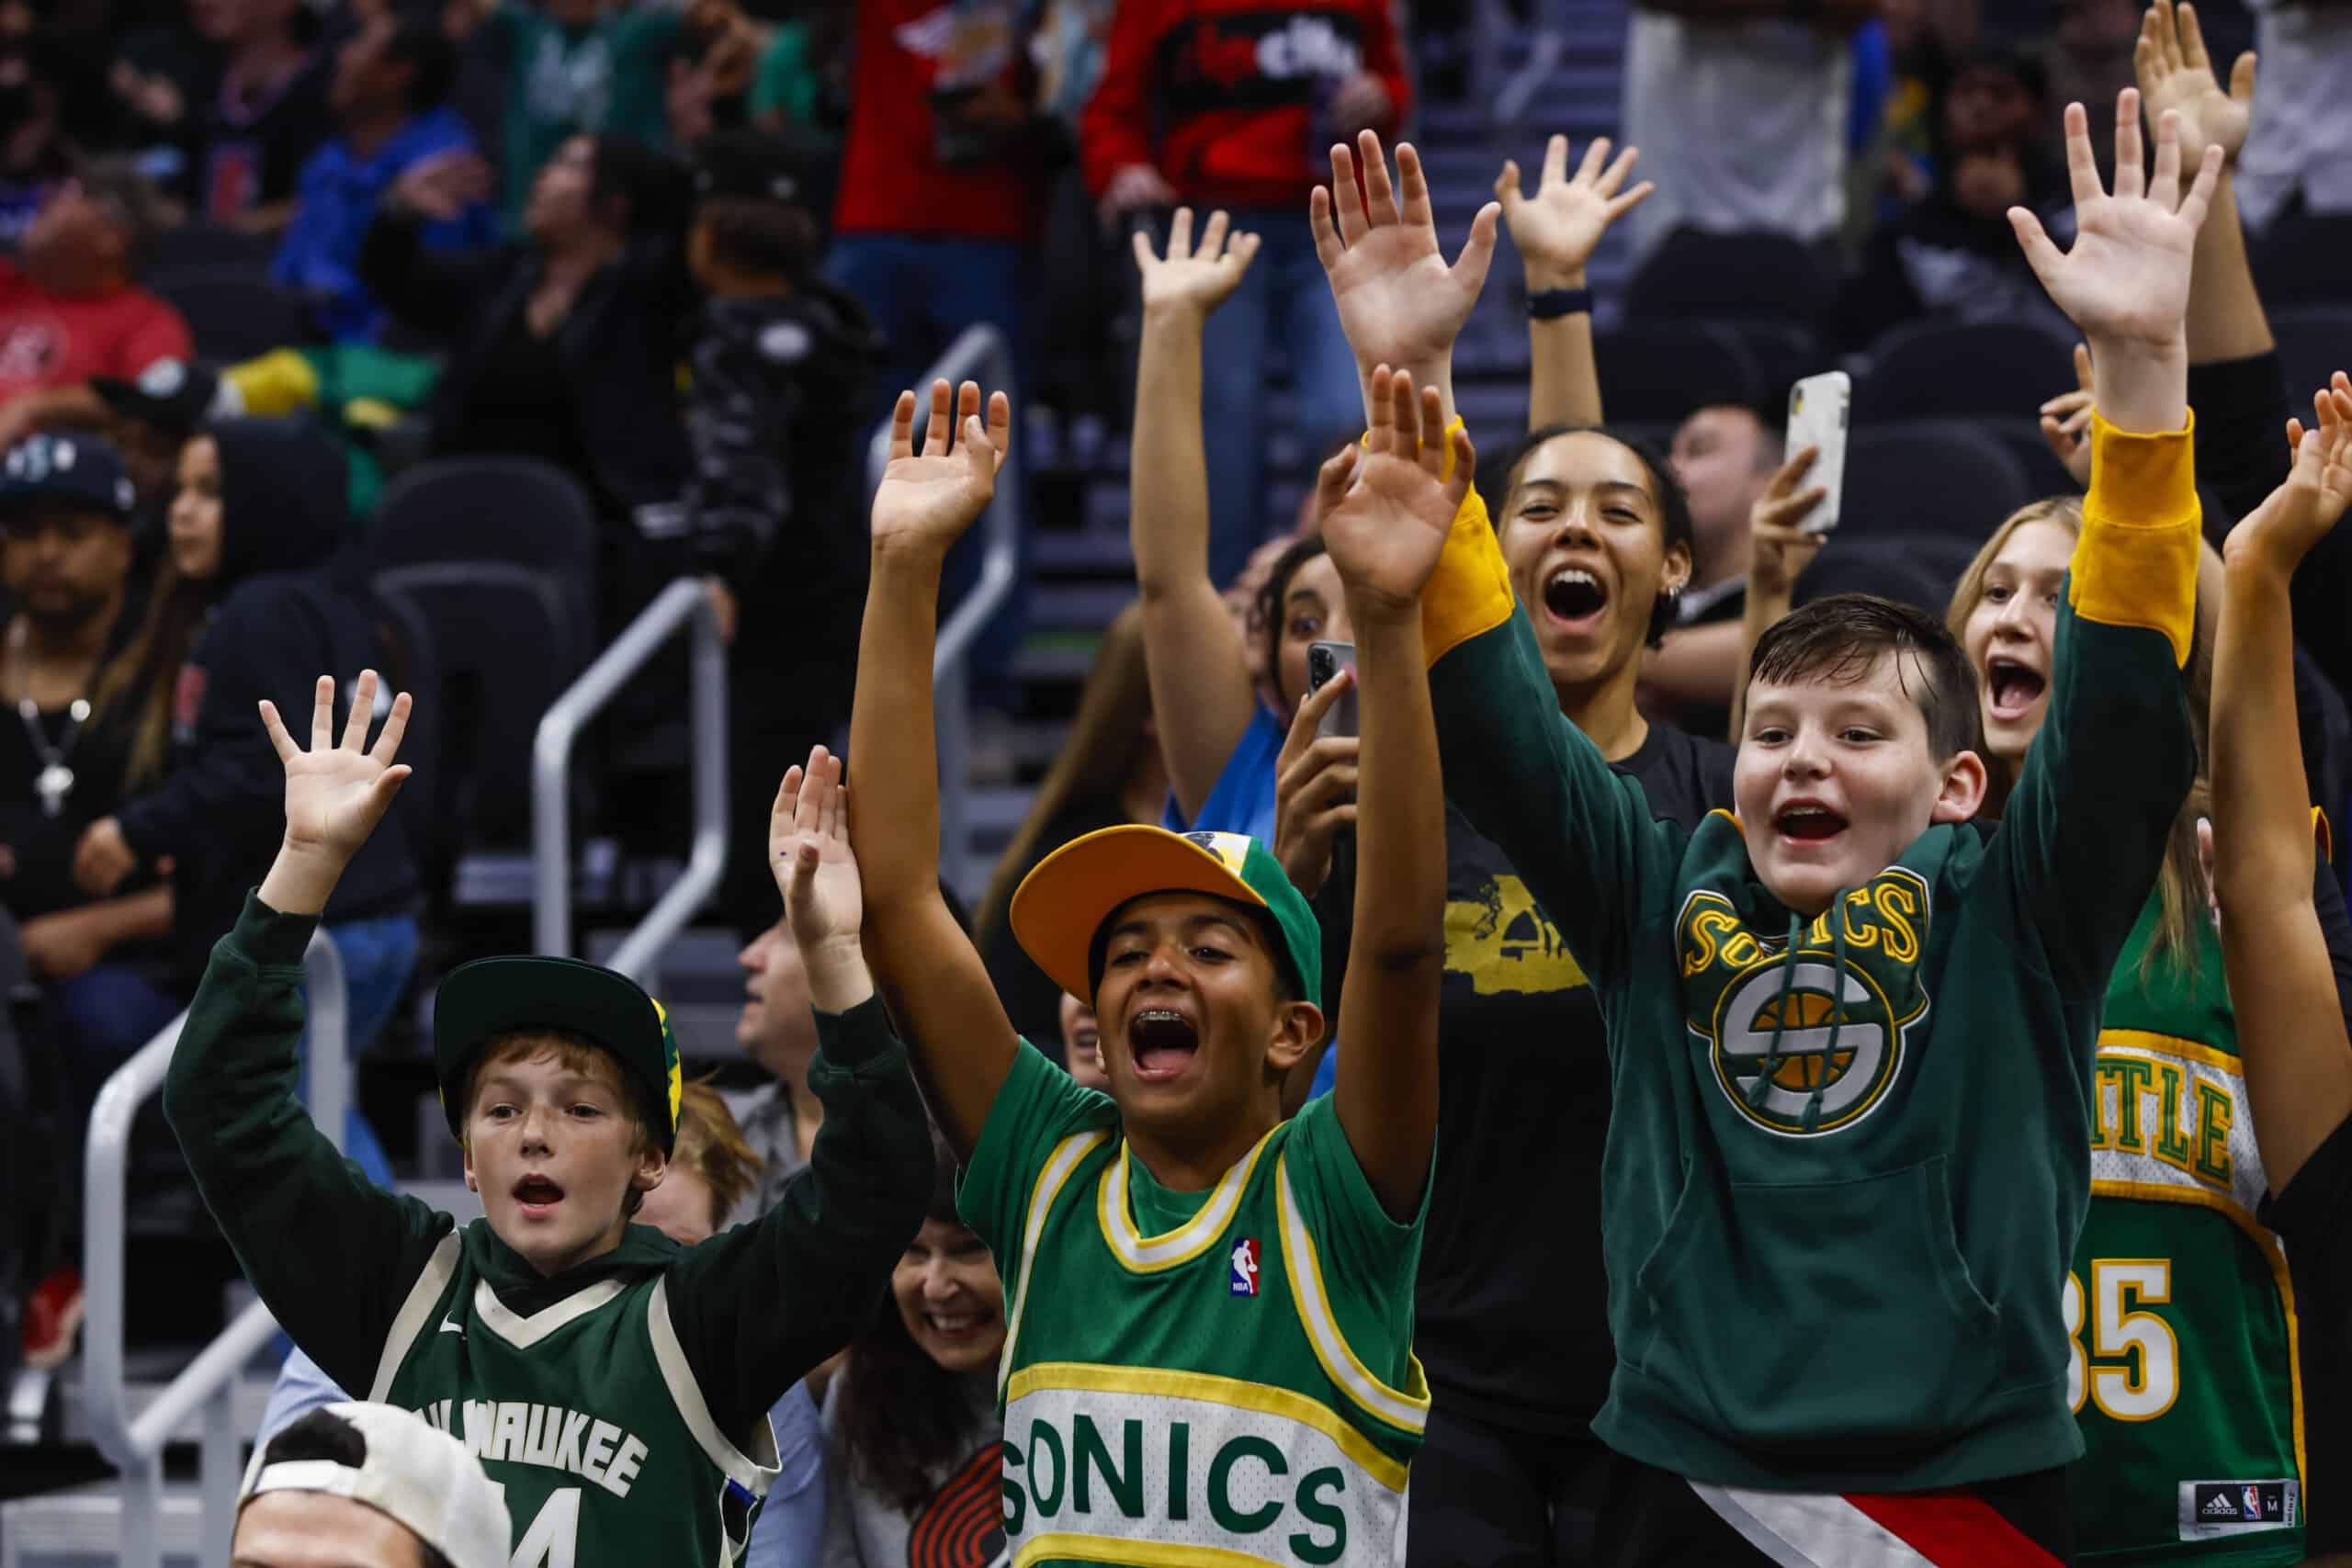 Is Seattle's 'Rain City Showcase' a sign of the NBA's return to